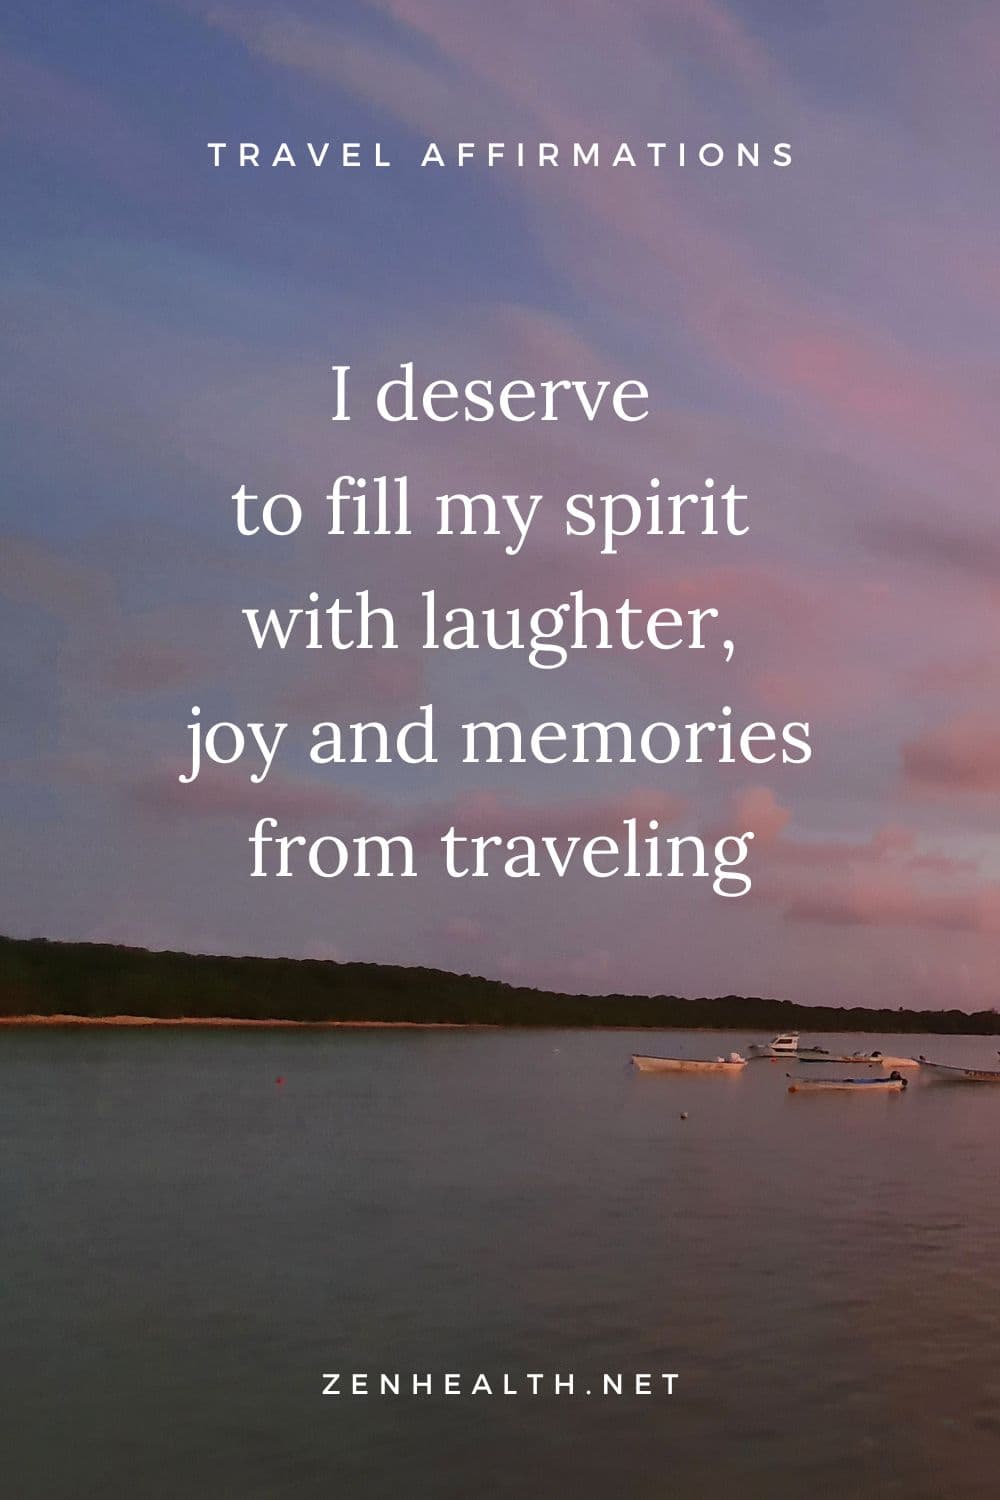 travel affirmations: I deserve to fill my spirit with laughter, joy and memories